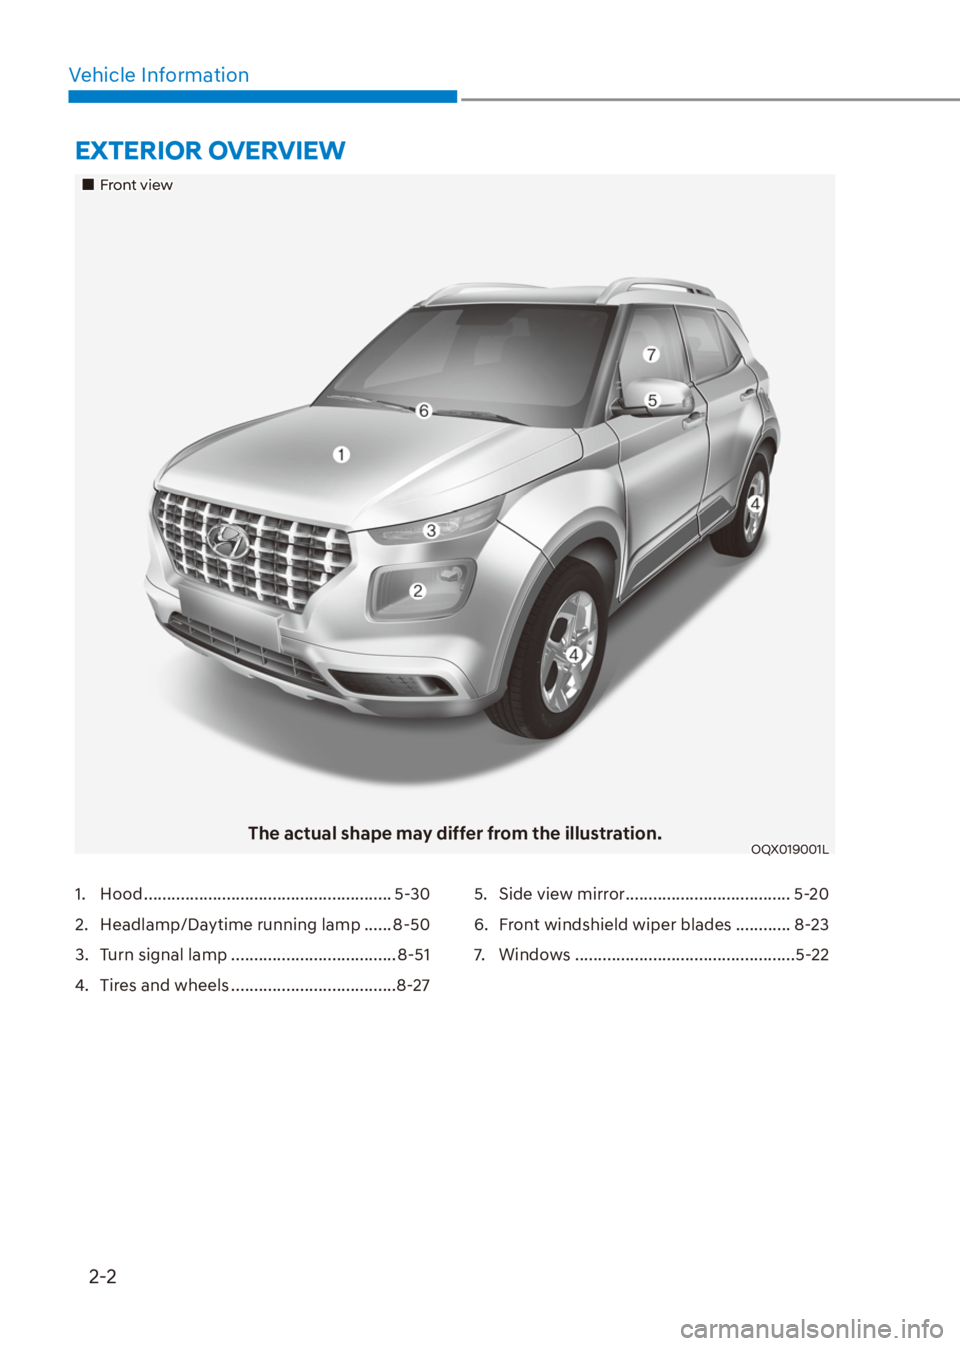 HYUNDAI VENUE 2021 User Guide 2-2
Vehicle Information
EXTERIOR OVERVIEW
��„Front view
The actual shape may differ from the illustration.OQX019001L
1. Hood ...................................................... 5-30
2.  Headlamp